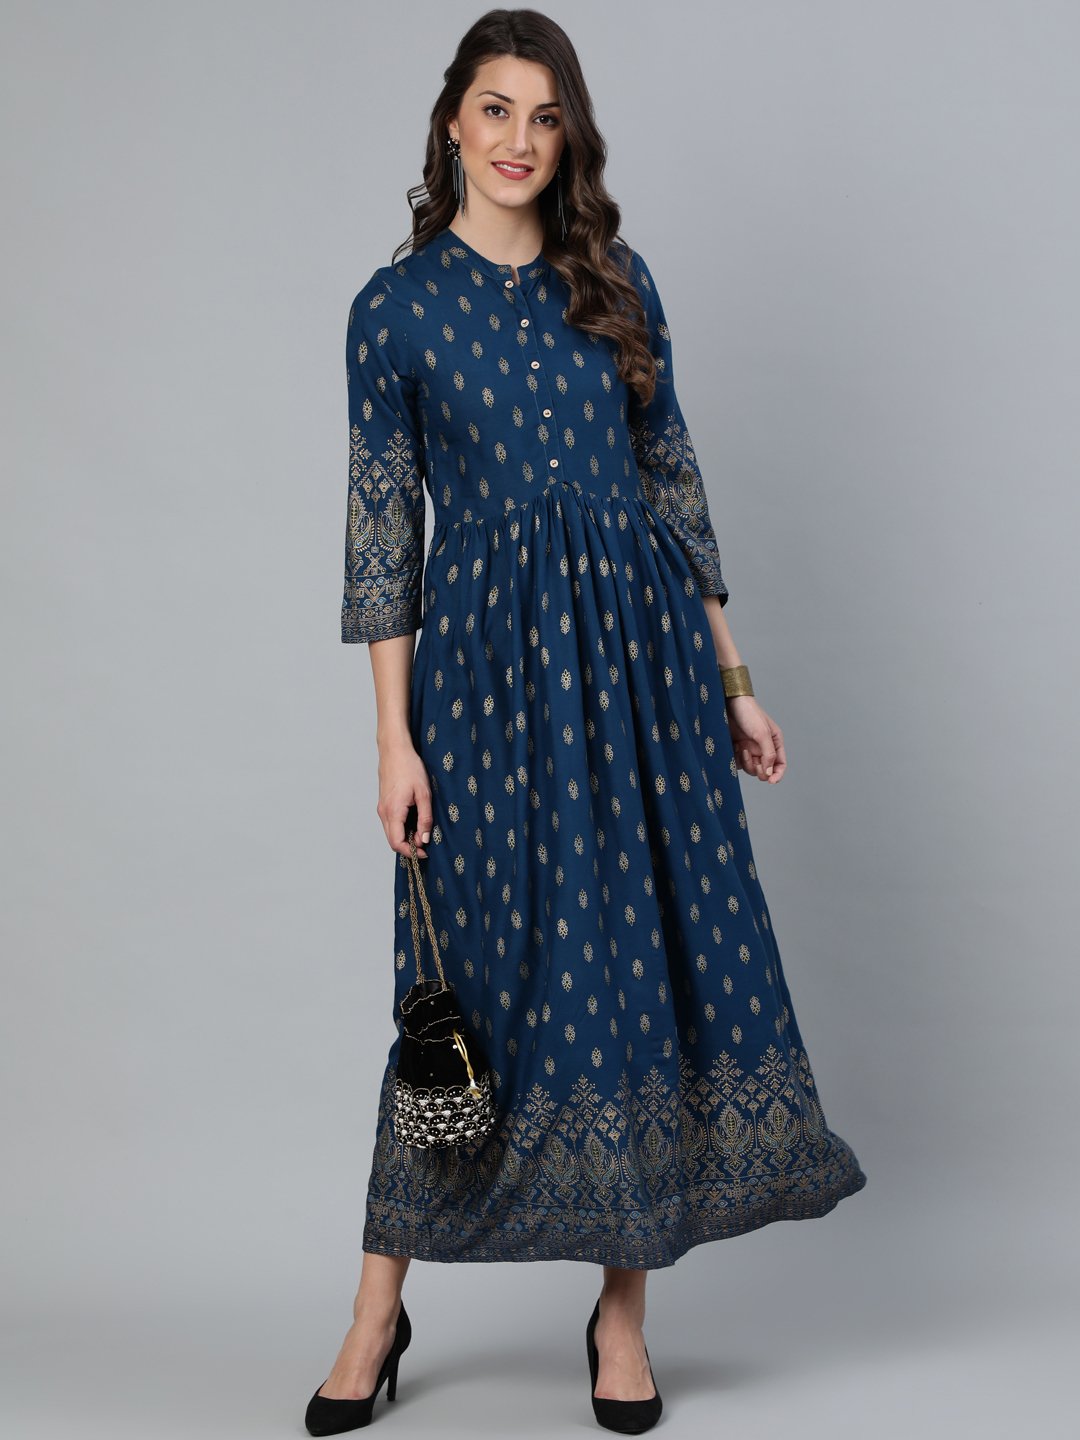 Women's Teal Blue Printed Maxi Dress With Three Quarter Sleeves - Nayo Clothing